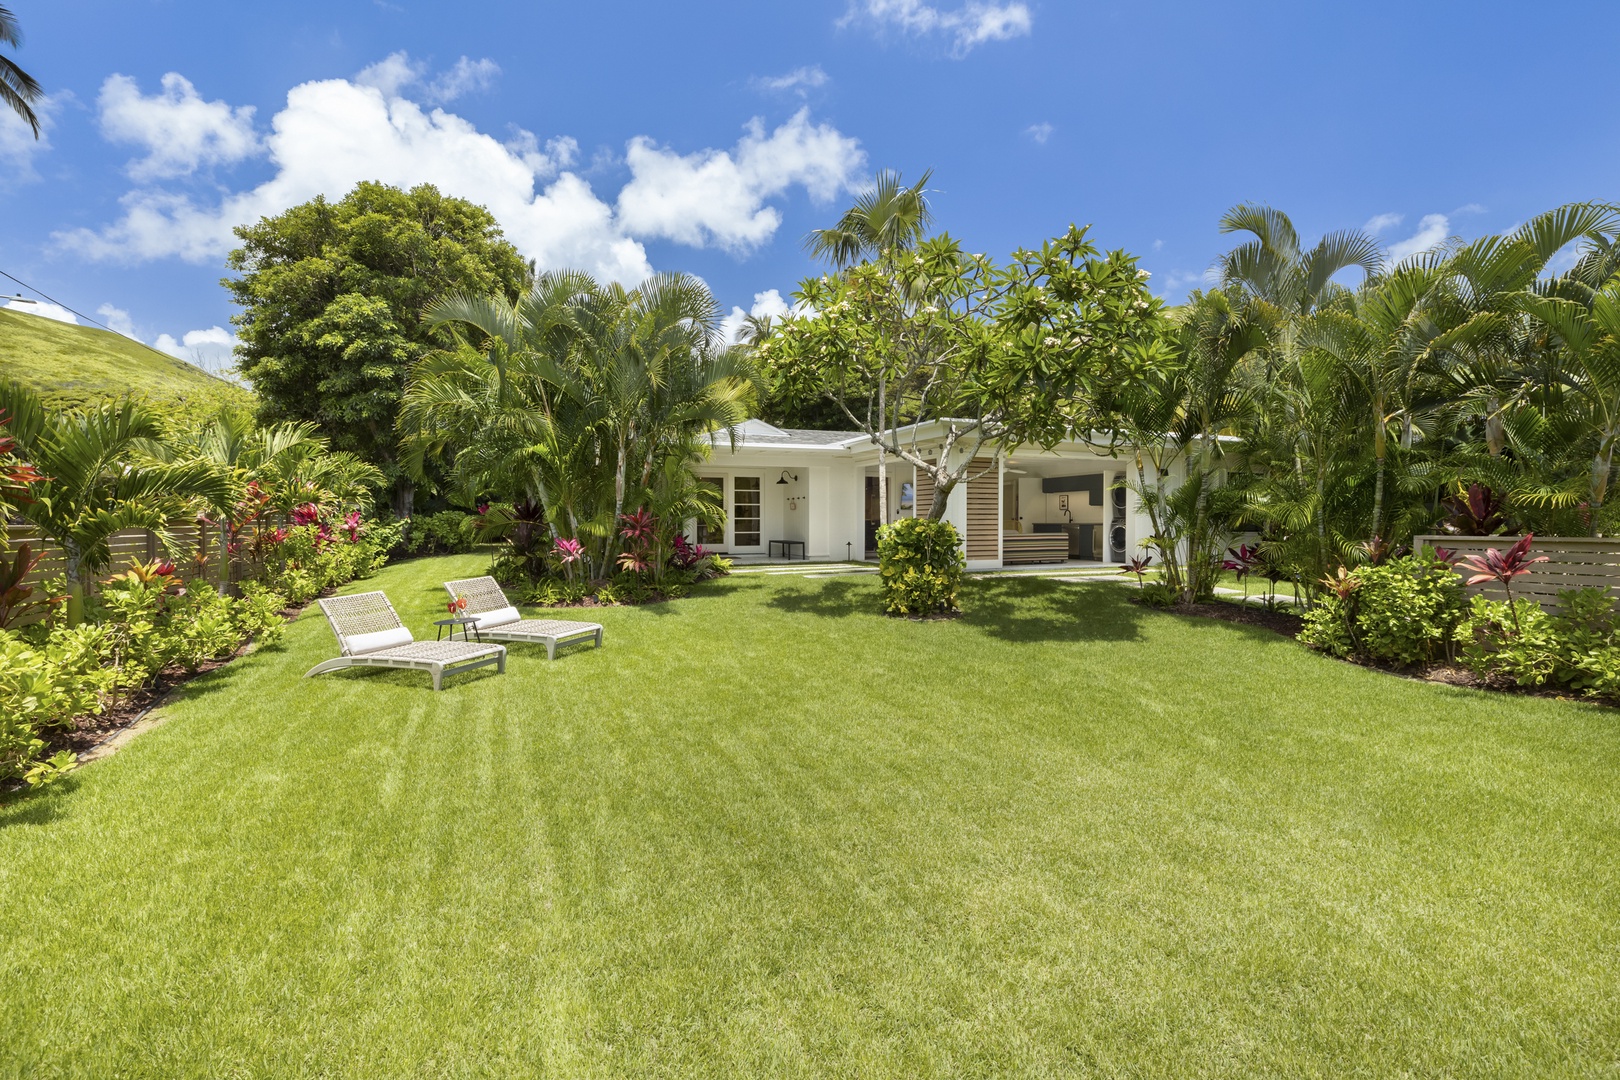 Kailua Vacation Rentals, Lanikai Hideaway - Professional natural landscaping is a tropical dream